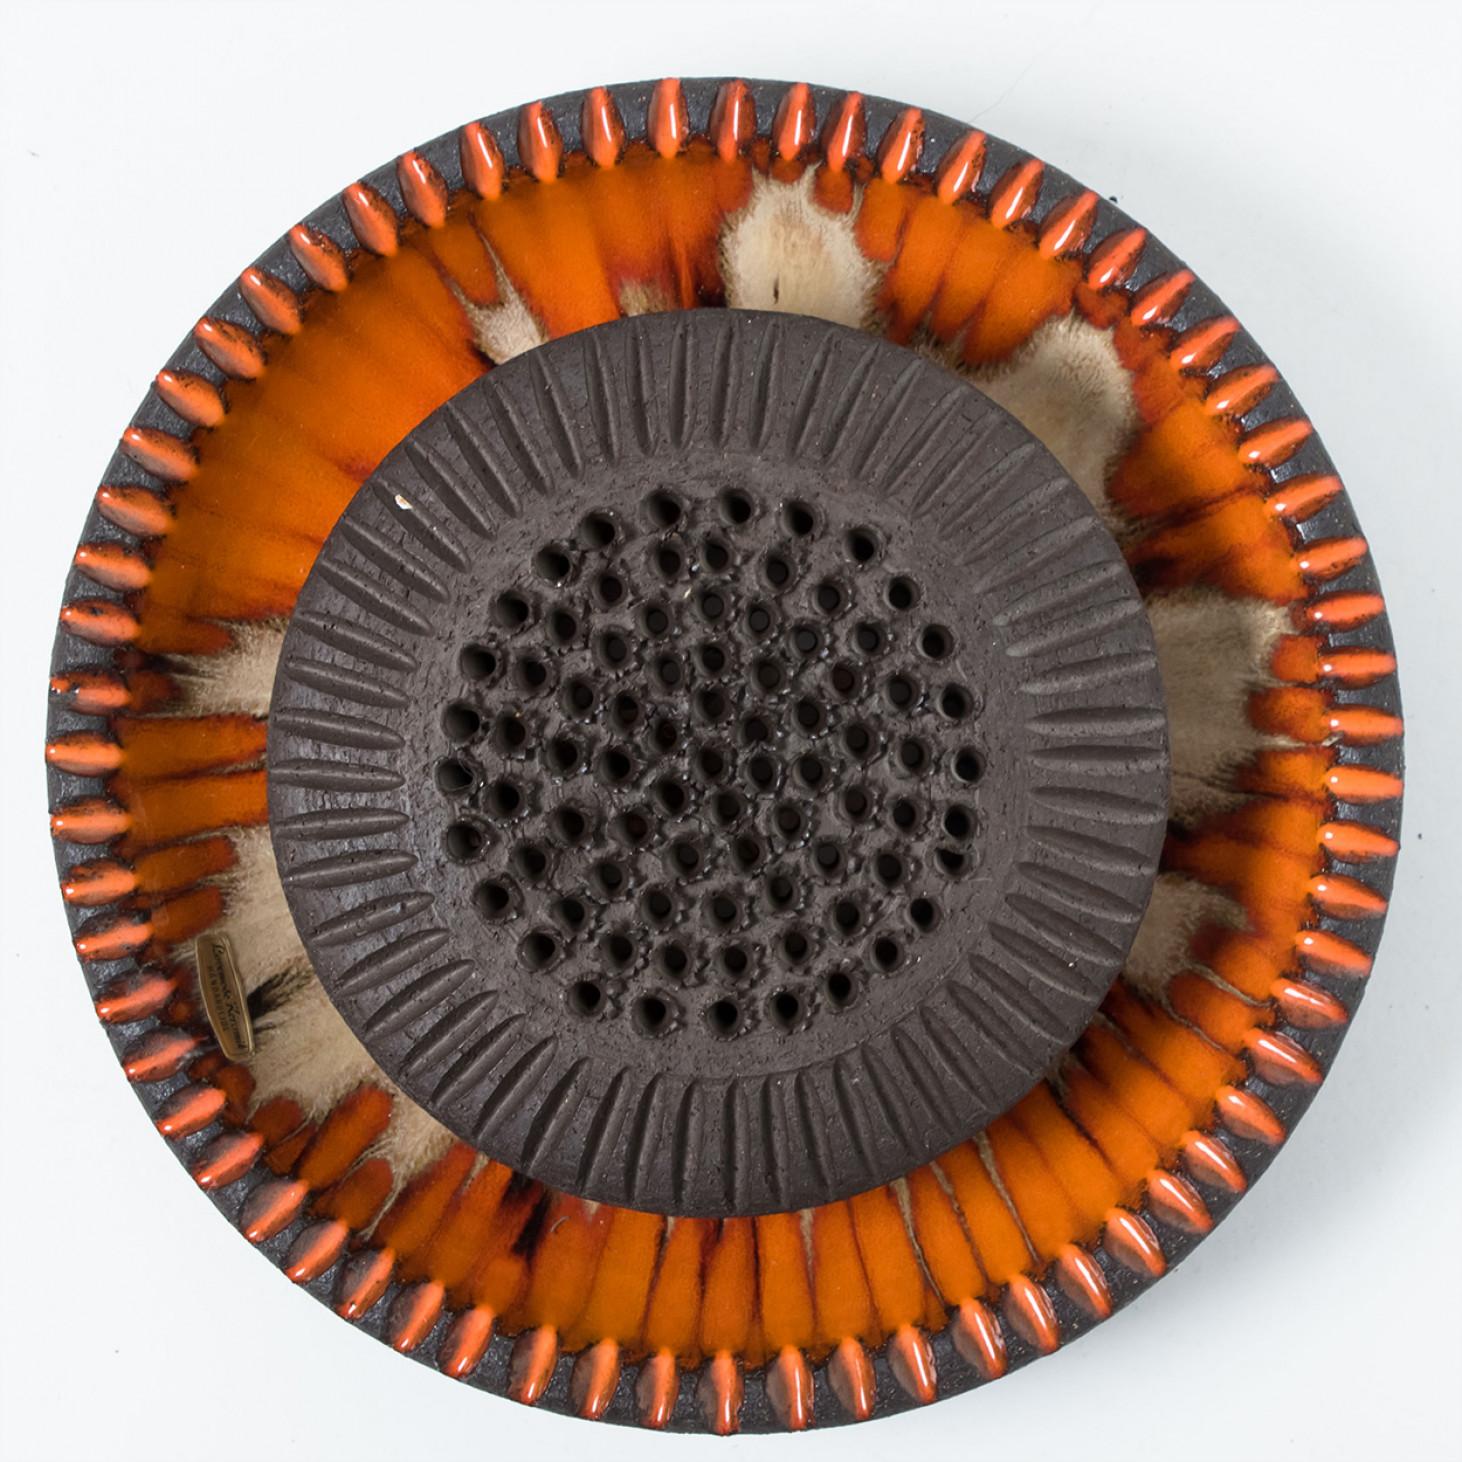 Spectacular circular ceramic wall light, with beautiful orange and brown accents. Manufactured in Denmark in the 1970s.

Labelled by Løvemose, in excellent condition.  Løvemose was a pottery in the town of Kædeby on the island of Langeland in